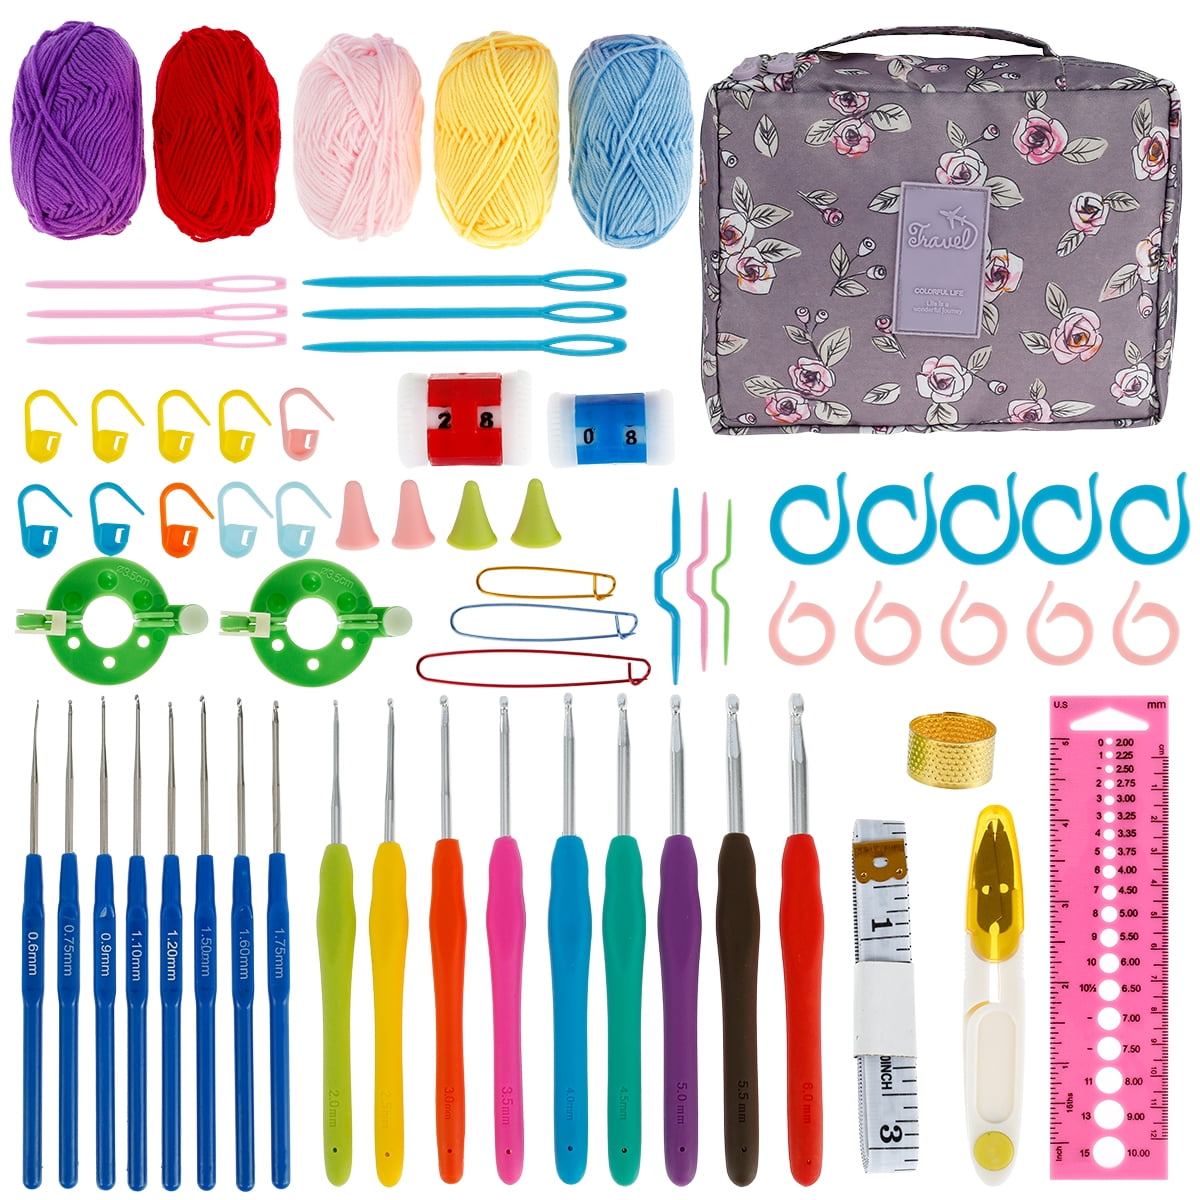 59 Pcs Crochet Kits for Beginners 0.6-6.0 mm Colorful Crochet Hook Set with  Storage Bag 5 Cotton Rolls Yarn Knitting Accessories - AliExpress